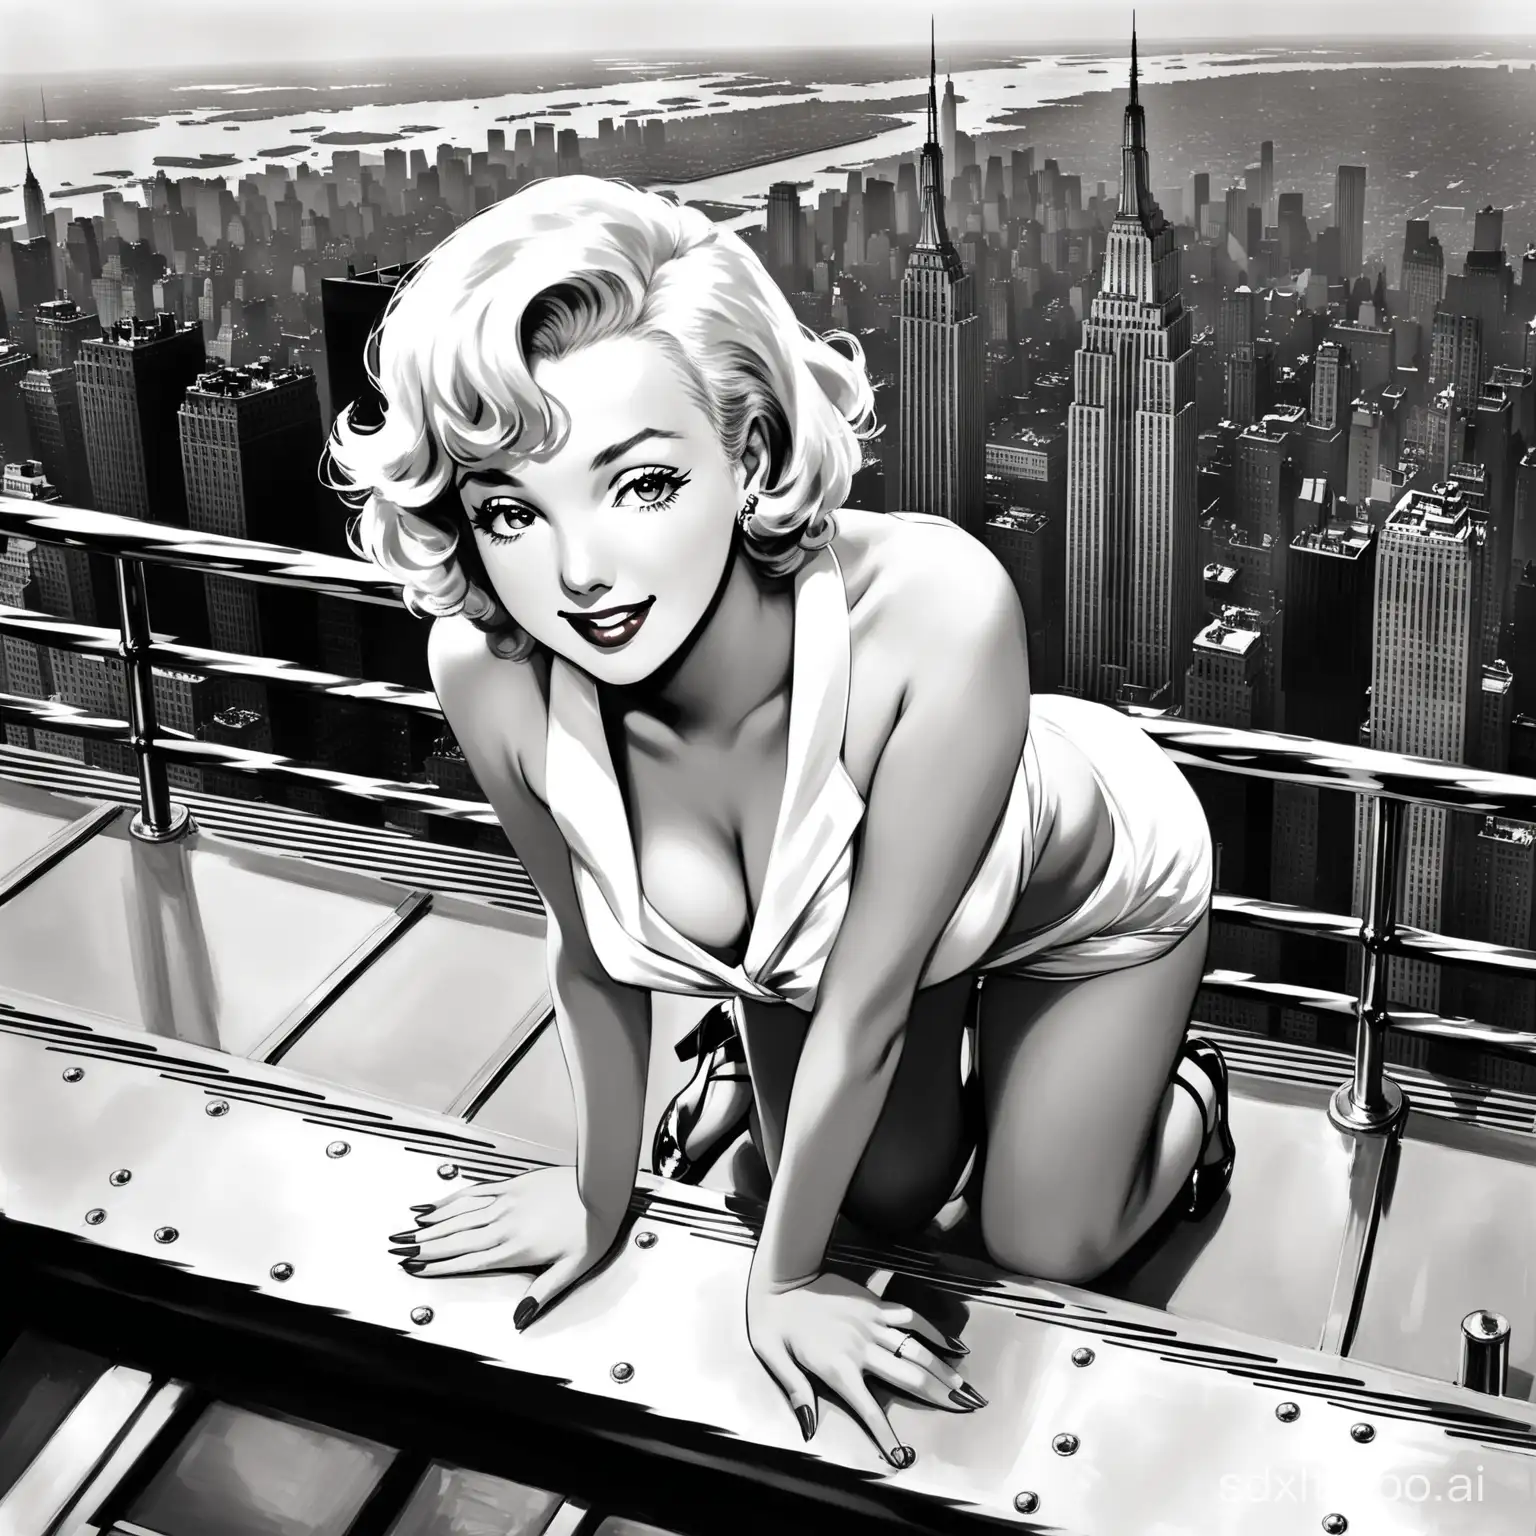 Marilyn Monroe standing on the top observation deck of the Empire State Building. She is in missionary position on the railing